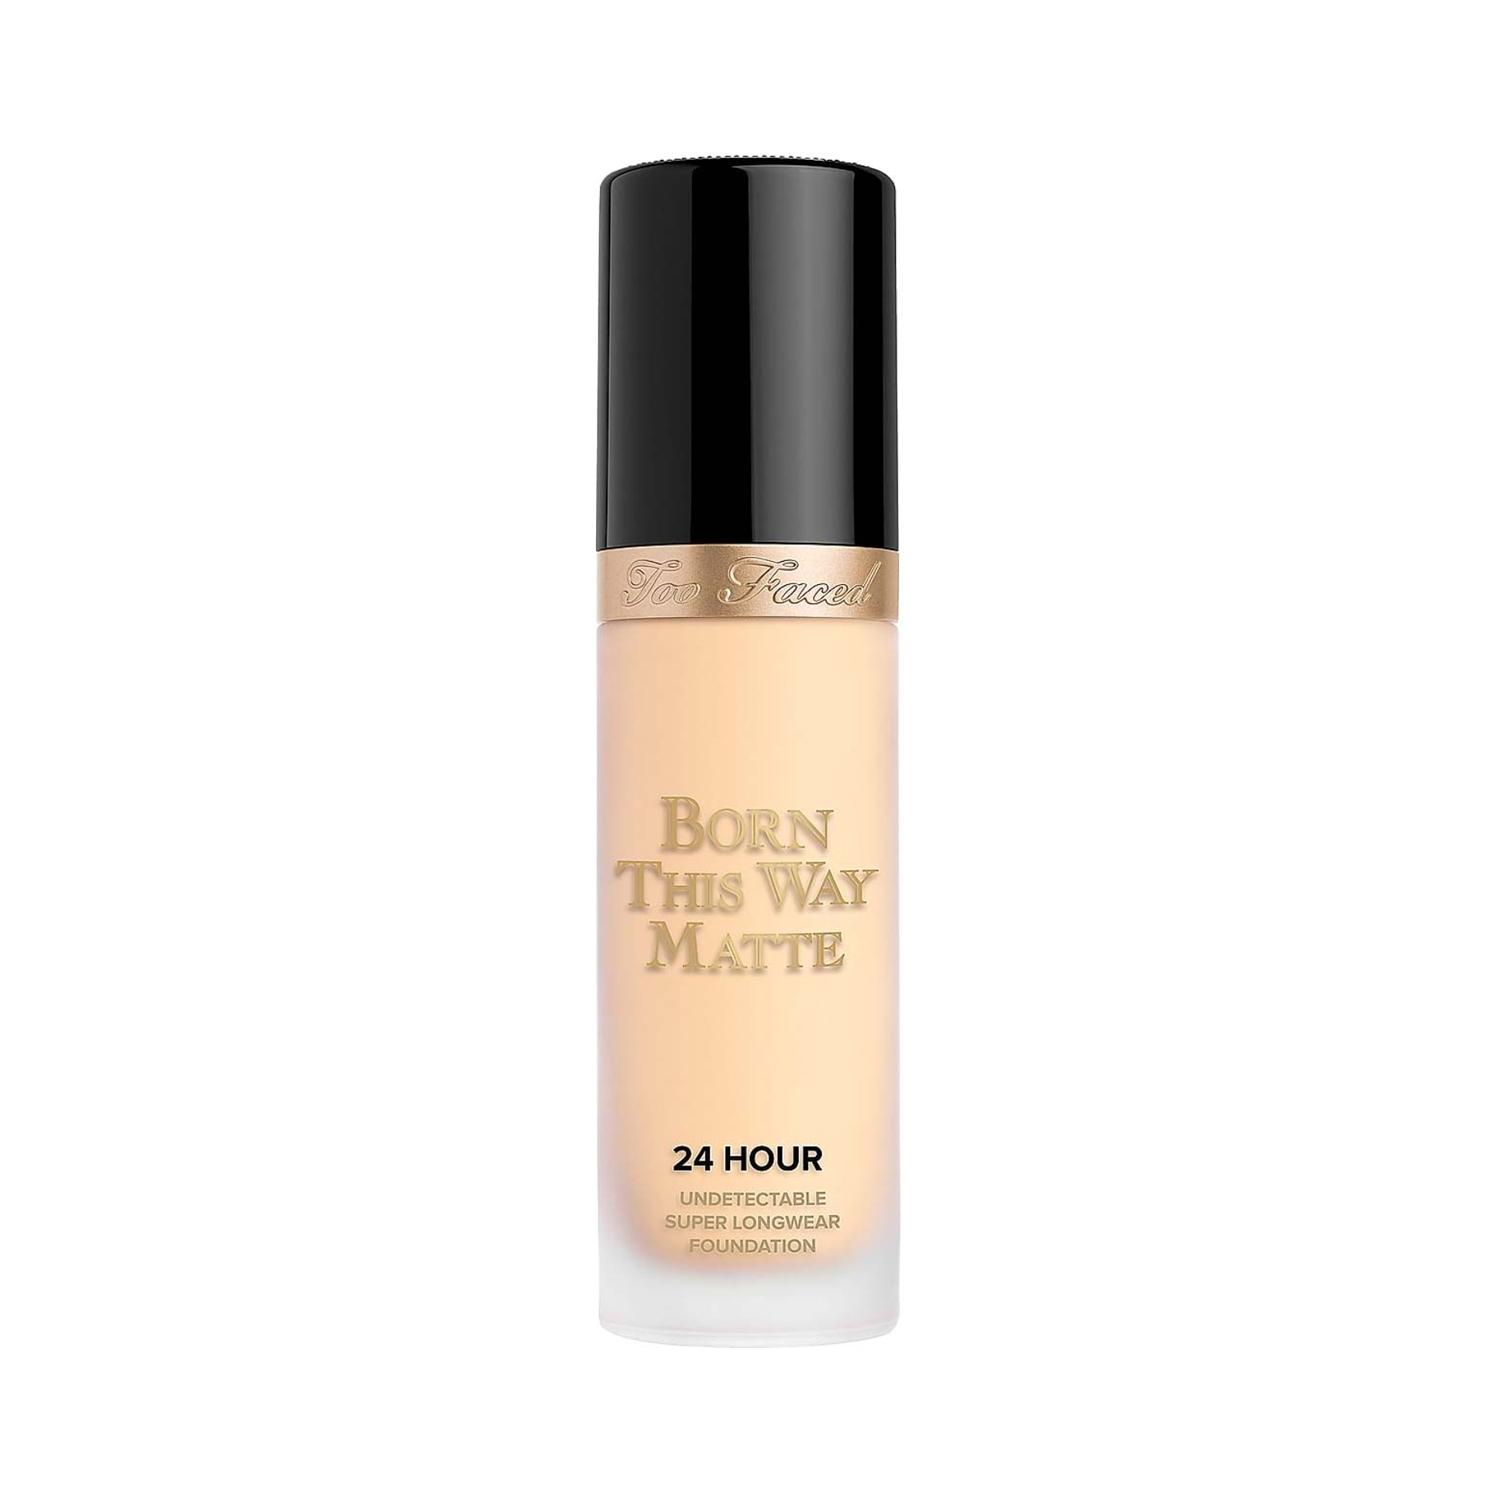 too faced born this way 24-hour longwear matte foundation - light beige (30ml)